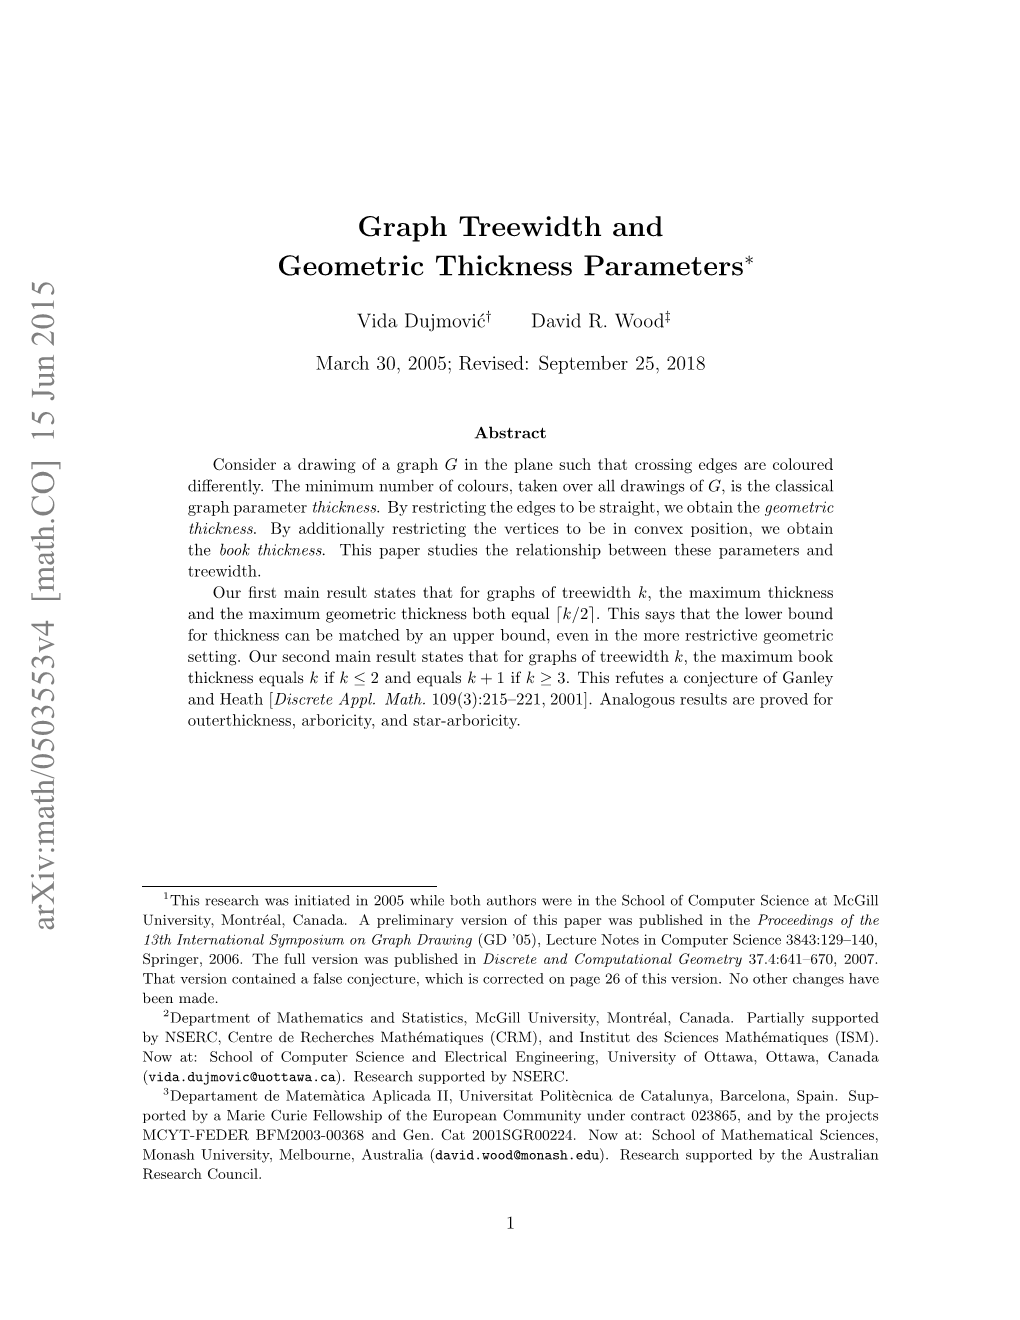 Graph Treewidth and Geometric Thickness Parameters